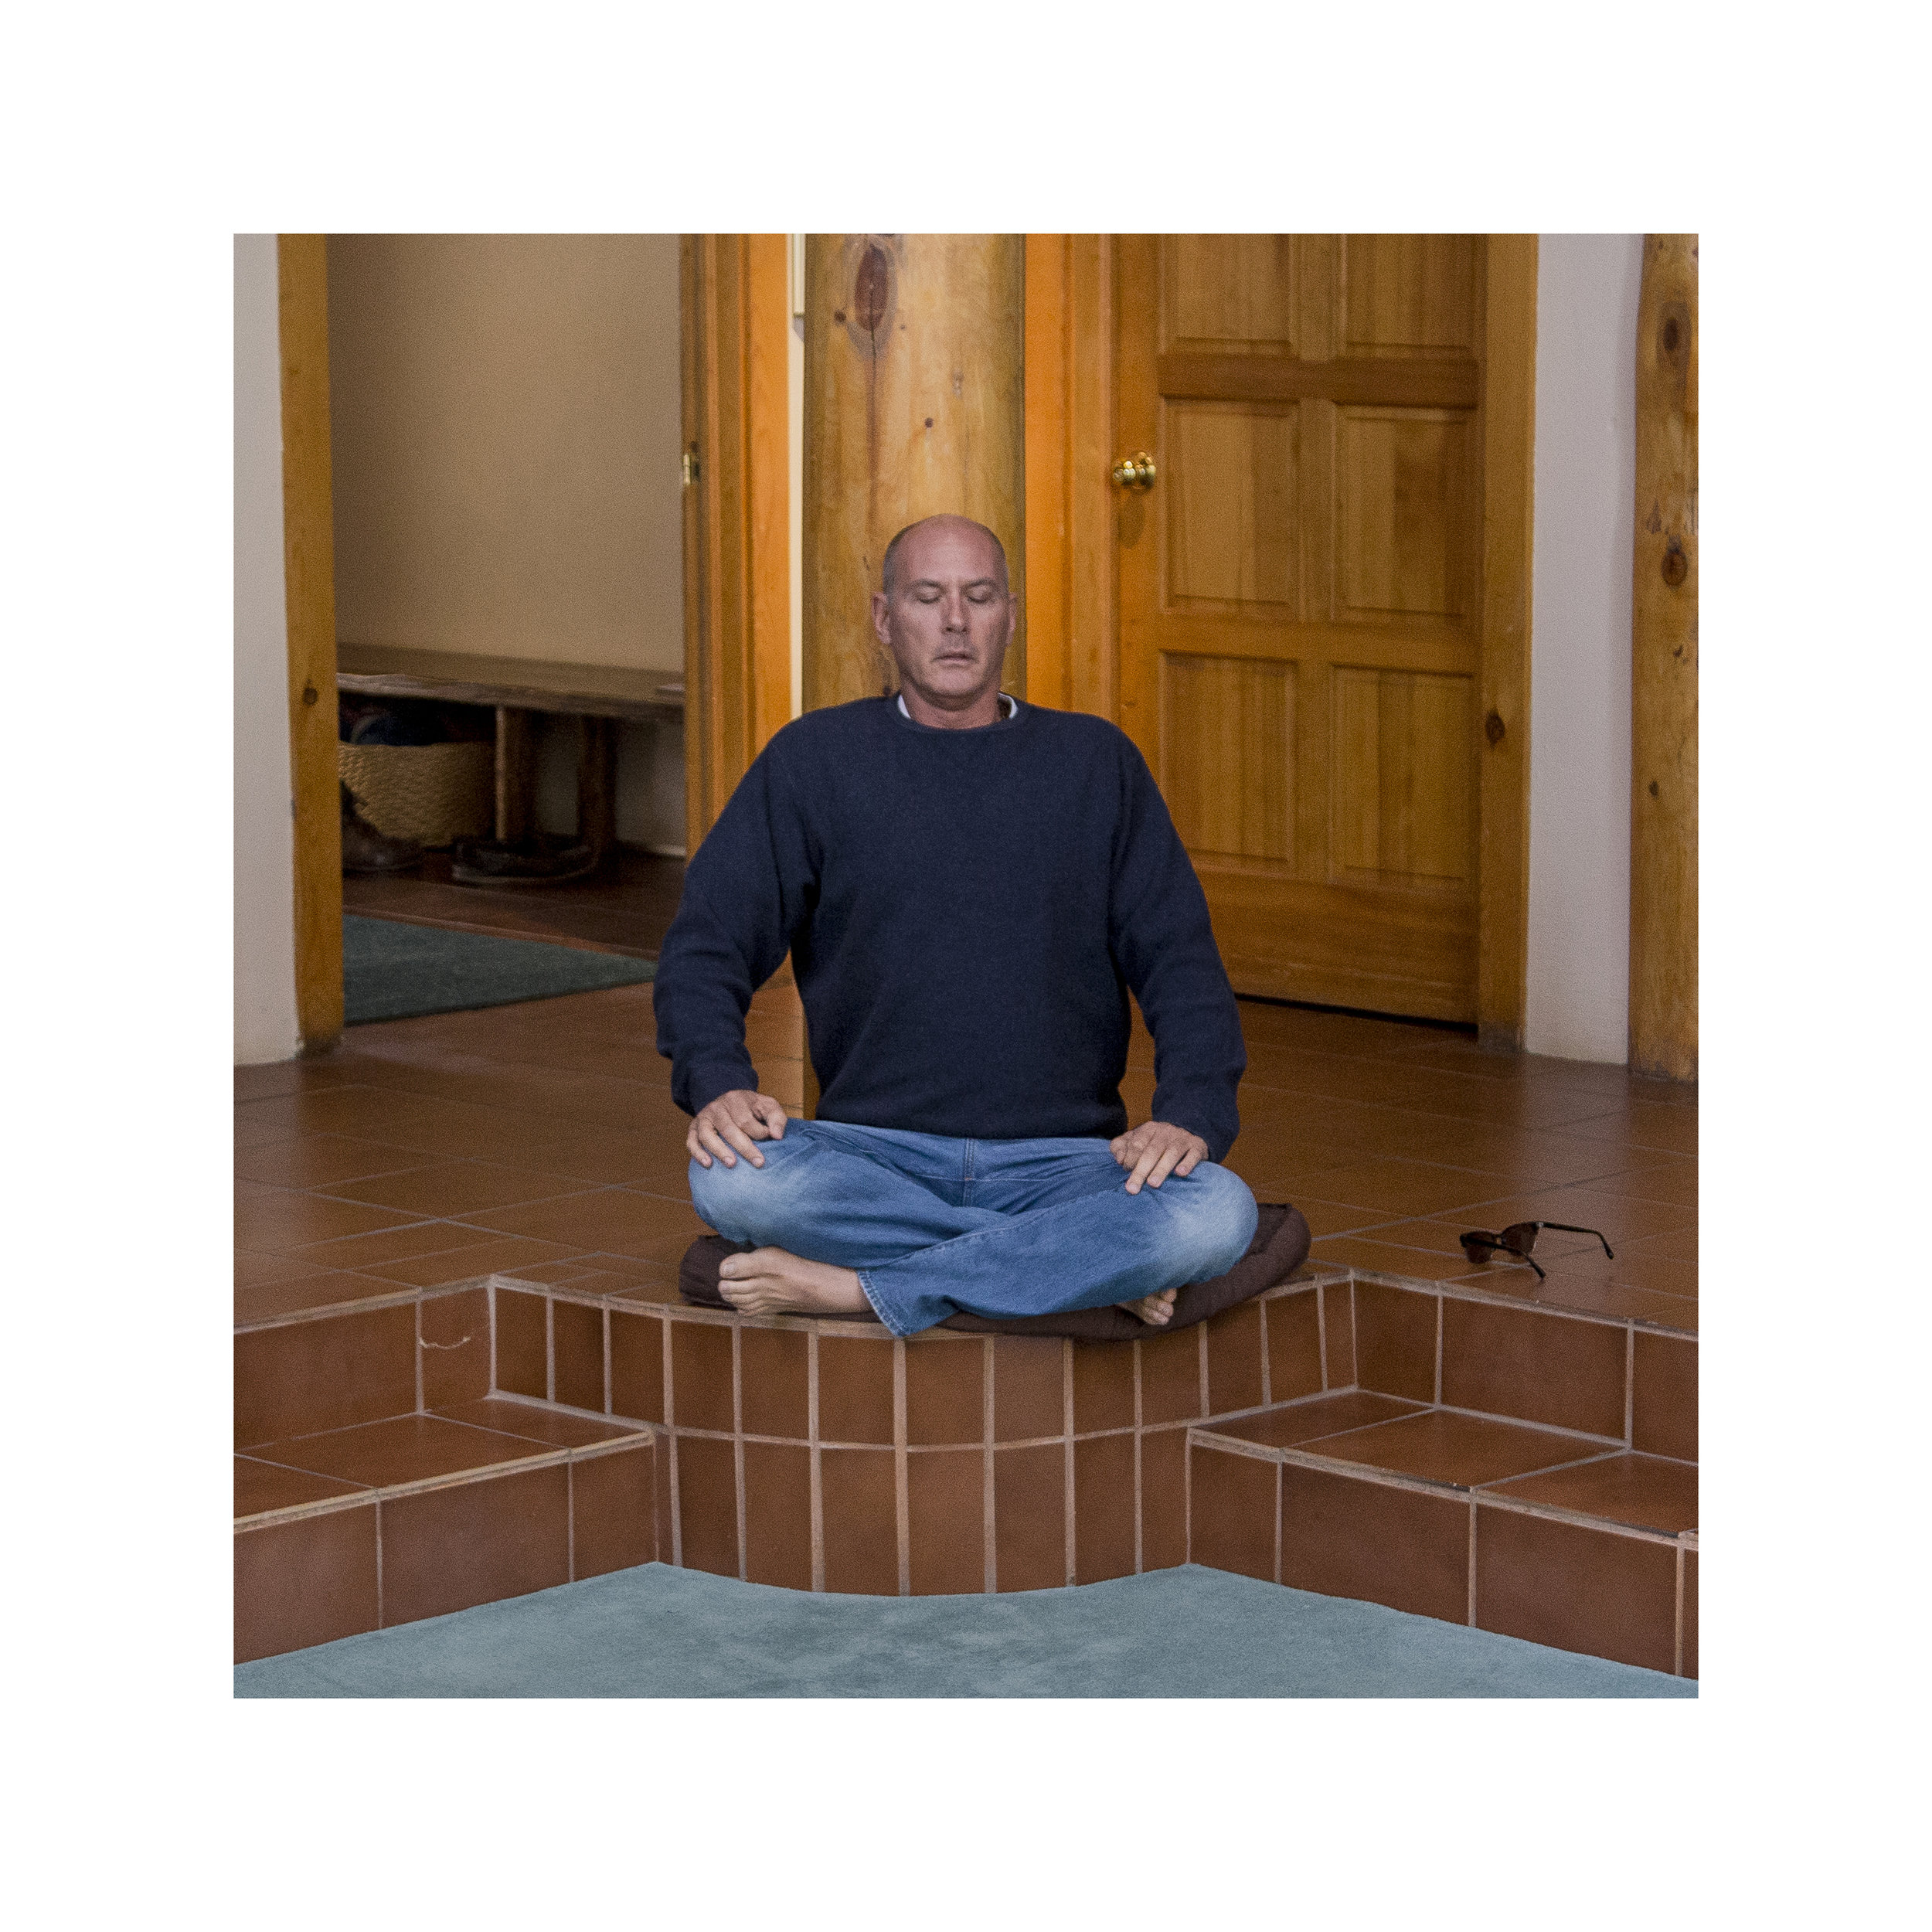  Scott, a real estate agent from Texas who has a second home in Crestone,&nbsp;meditates in the Carmelite monastery. 